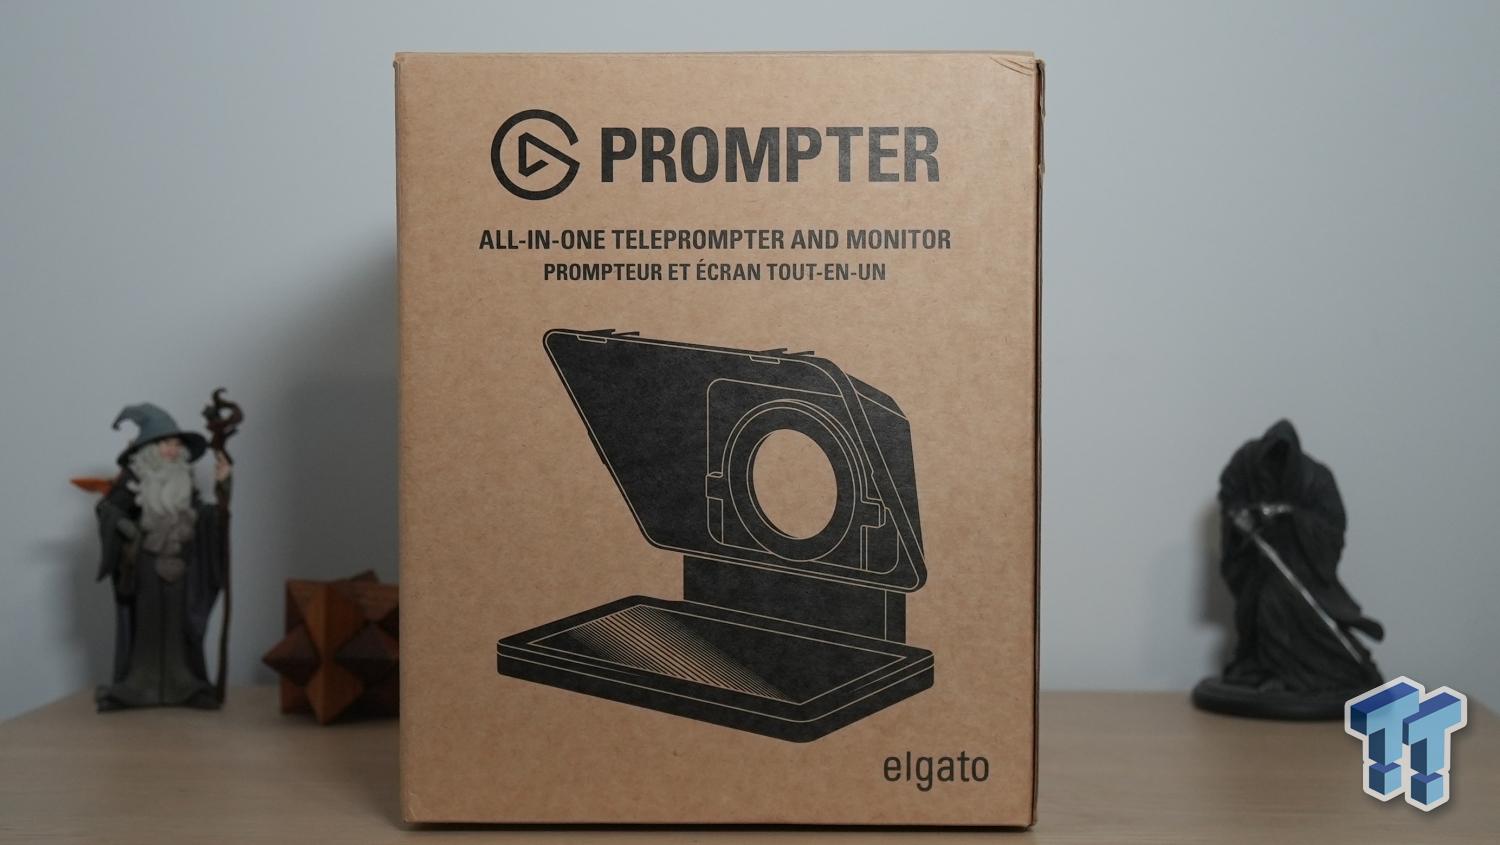 Elgato Unveils First-of-its-Kind Teleprompter - The Gaming Stuff